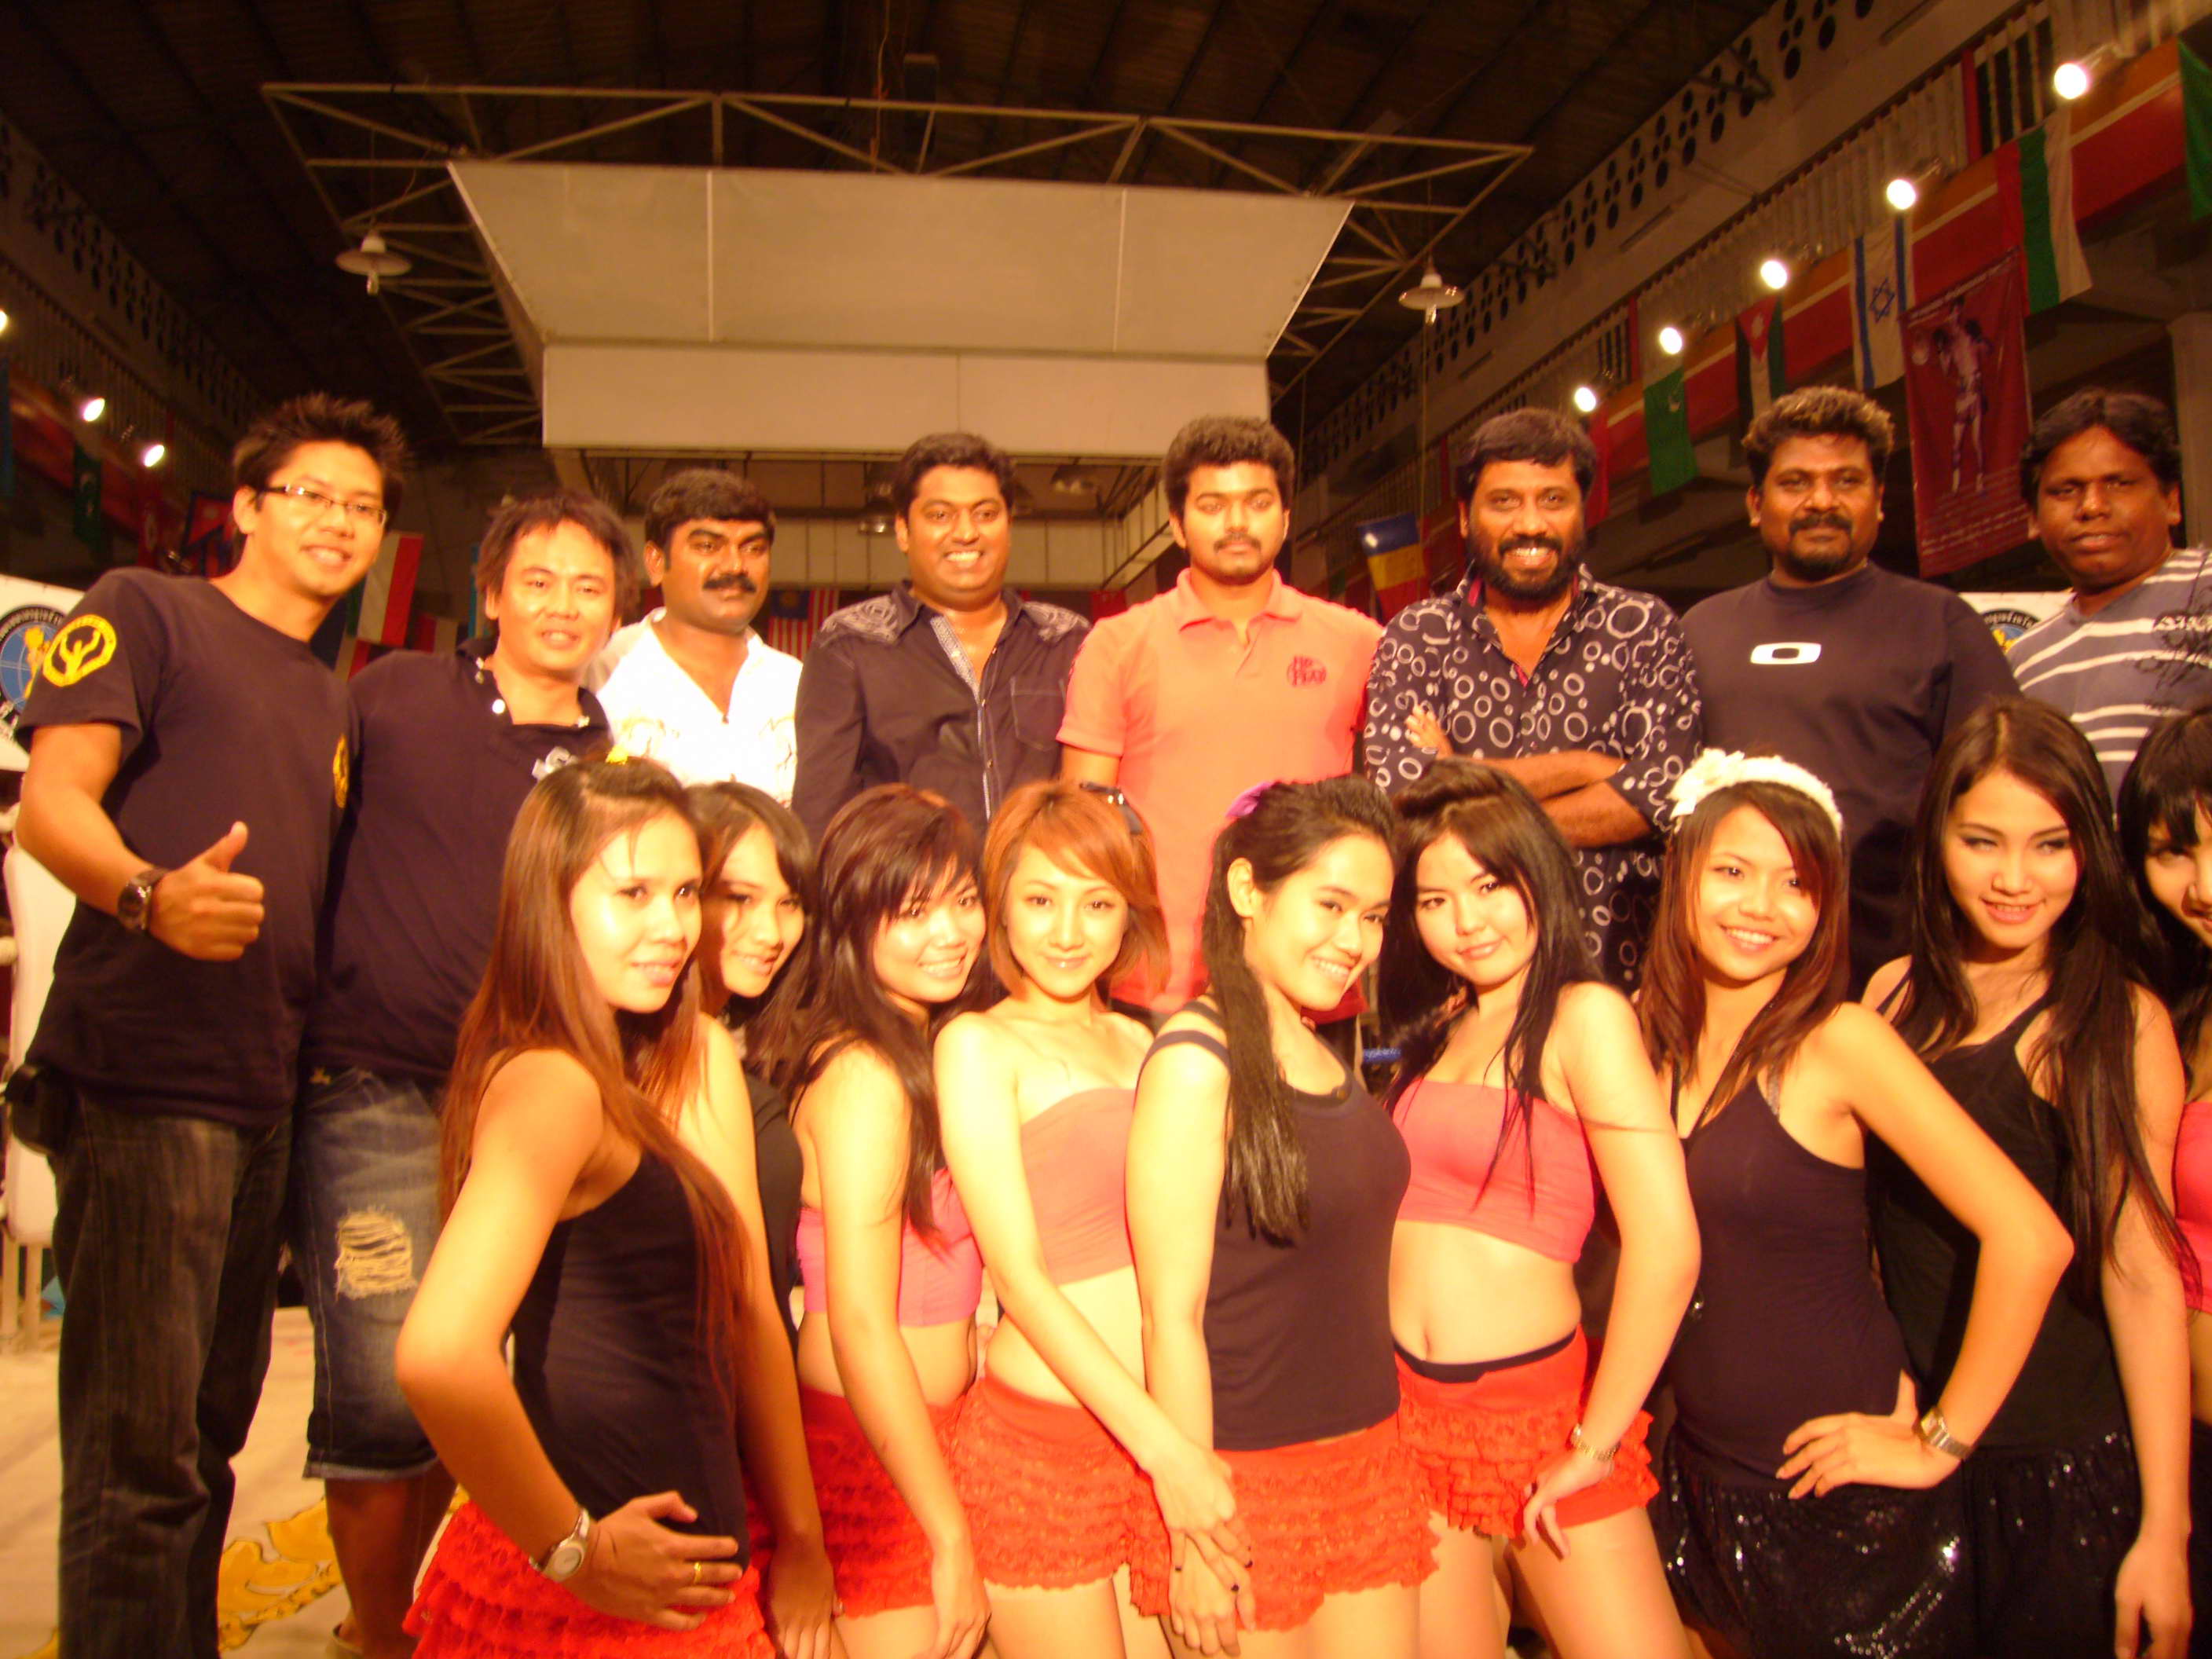 India Movie, see more photos at our Facebook >> muaythai911@hotmail.com